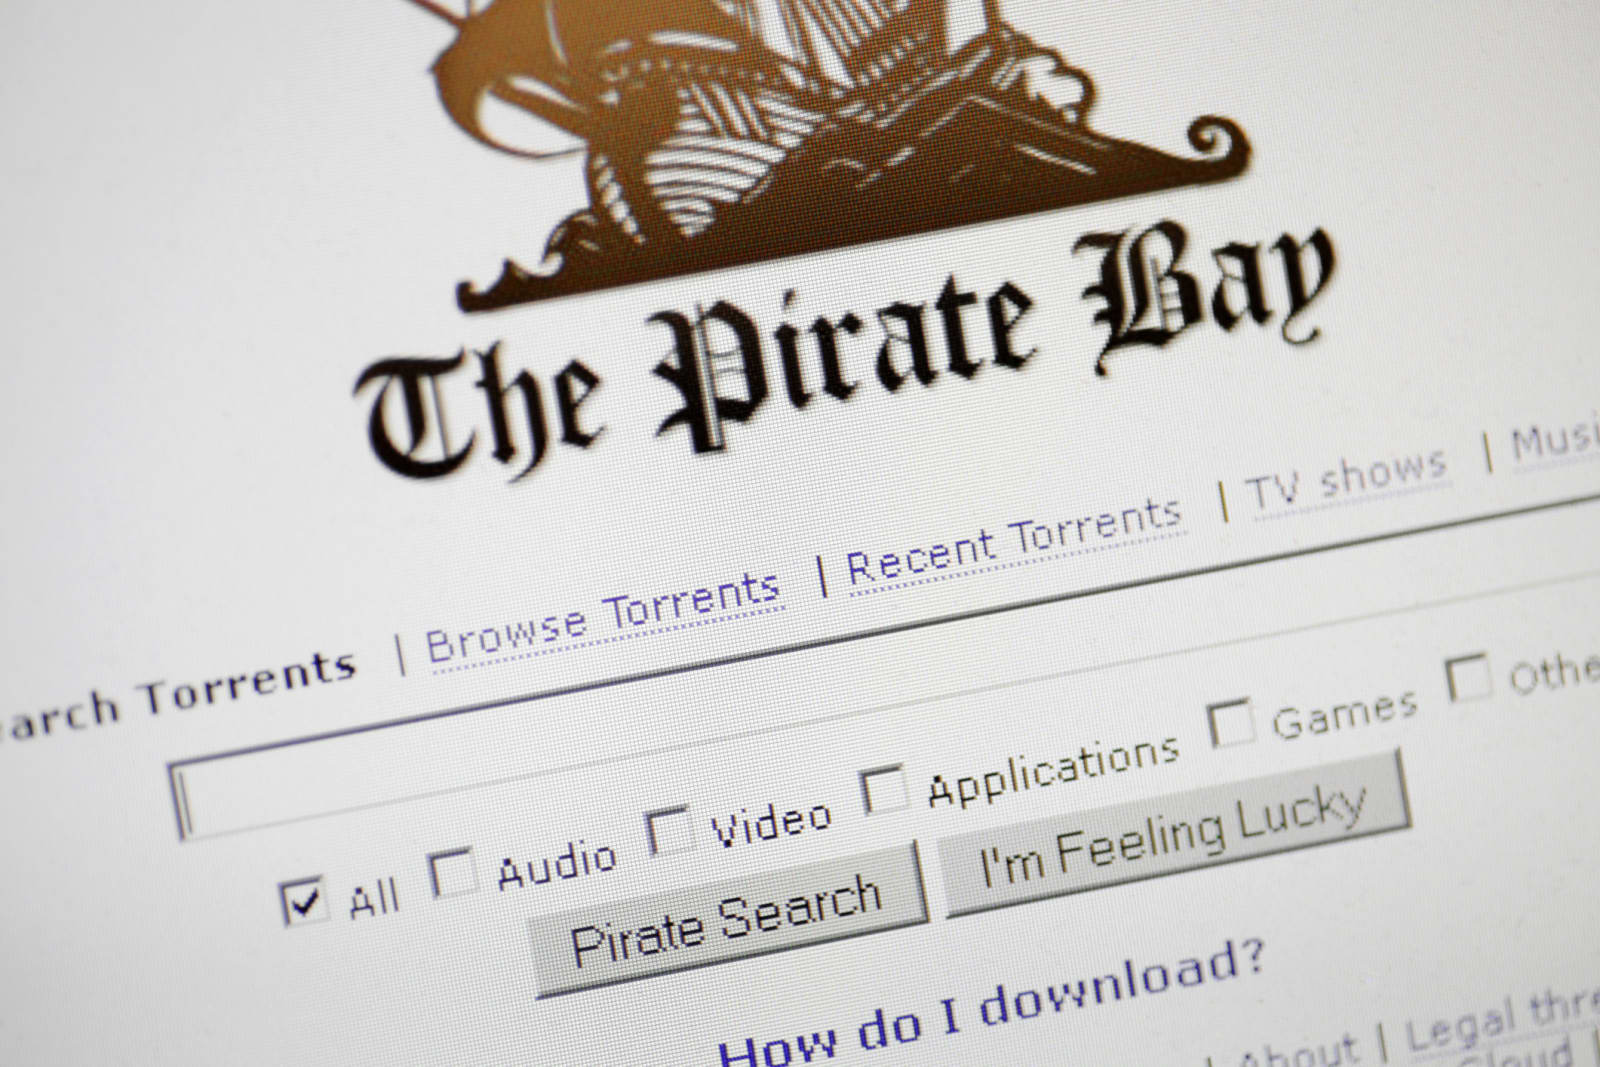 'Bucharest, Romania - January 10, 2012: The Pirate Bay website main page is displayed on a computer screen. The Pirate Bay is a